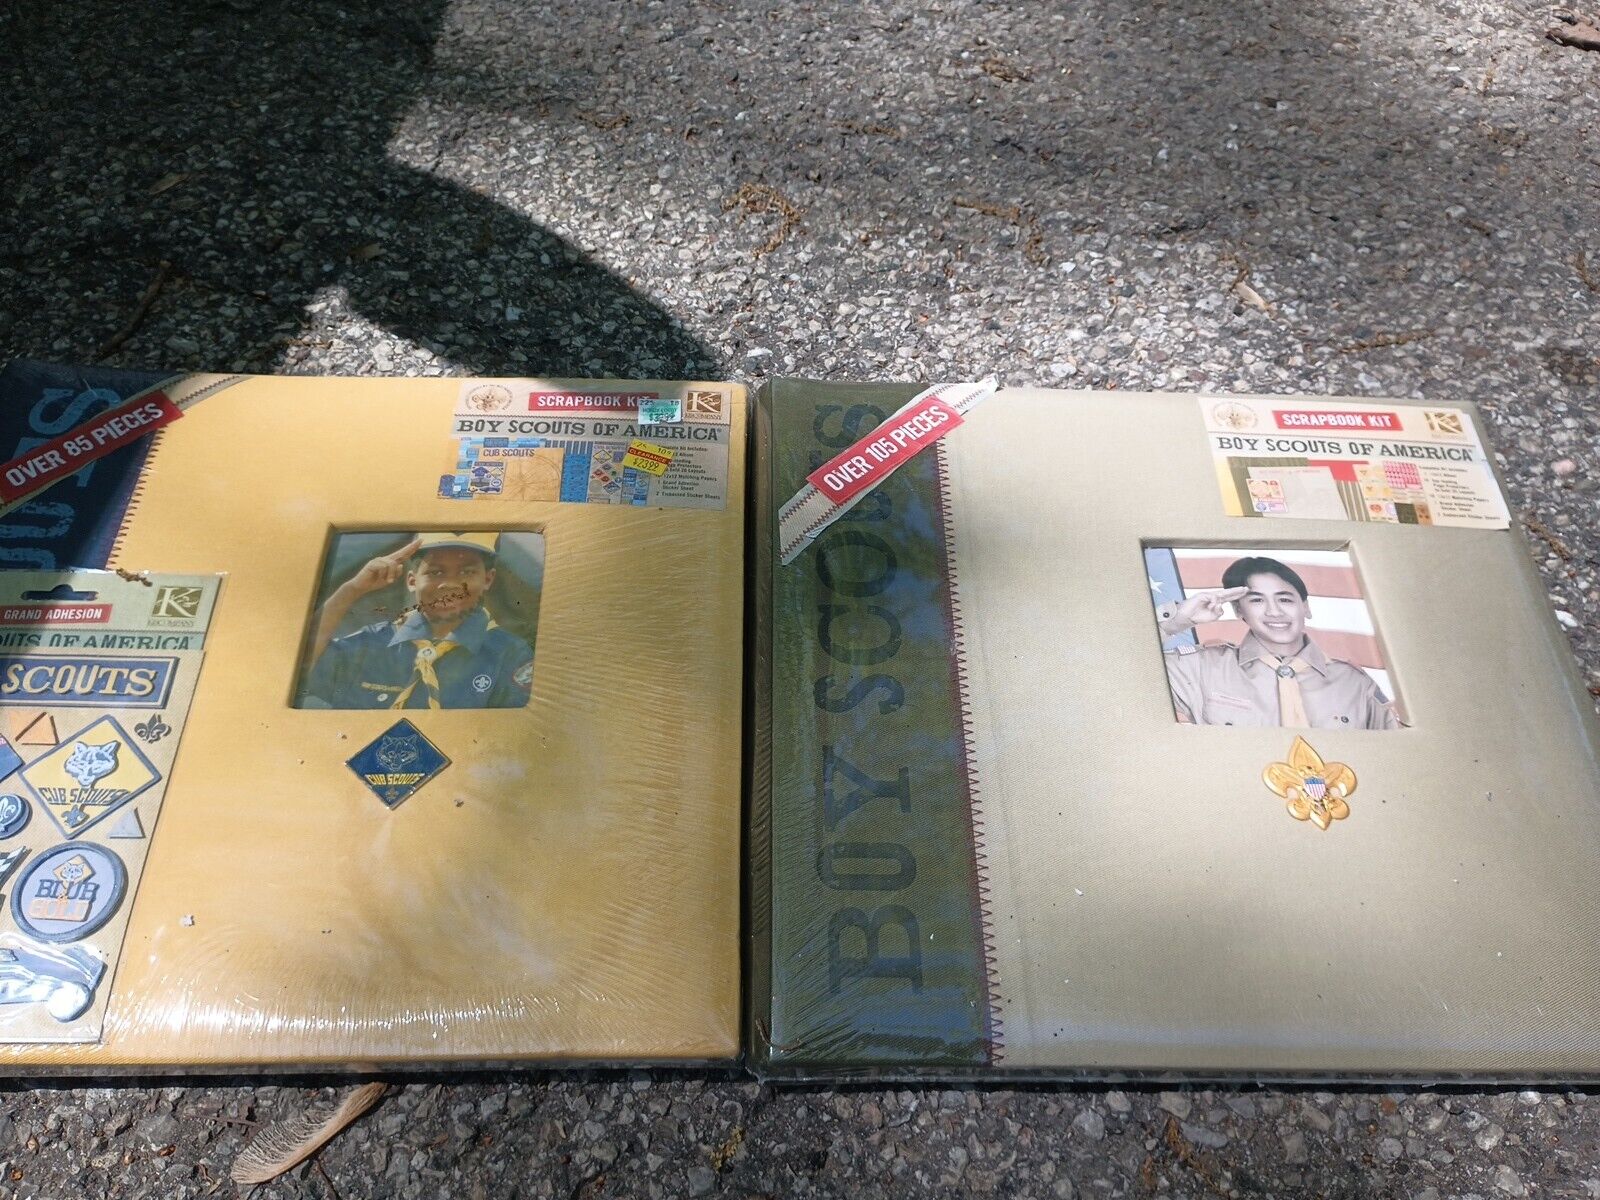 2 Lot 2005 NEW Boy Scouts of America 12x12” Scrapbook Kit Over 105 & 85 Pieces 